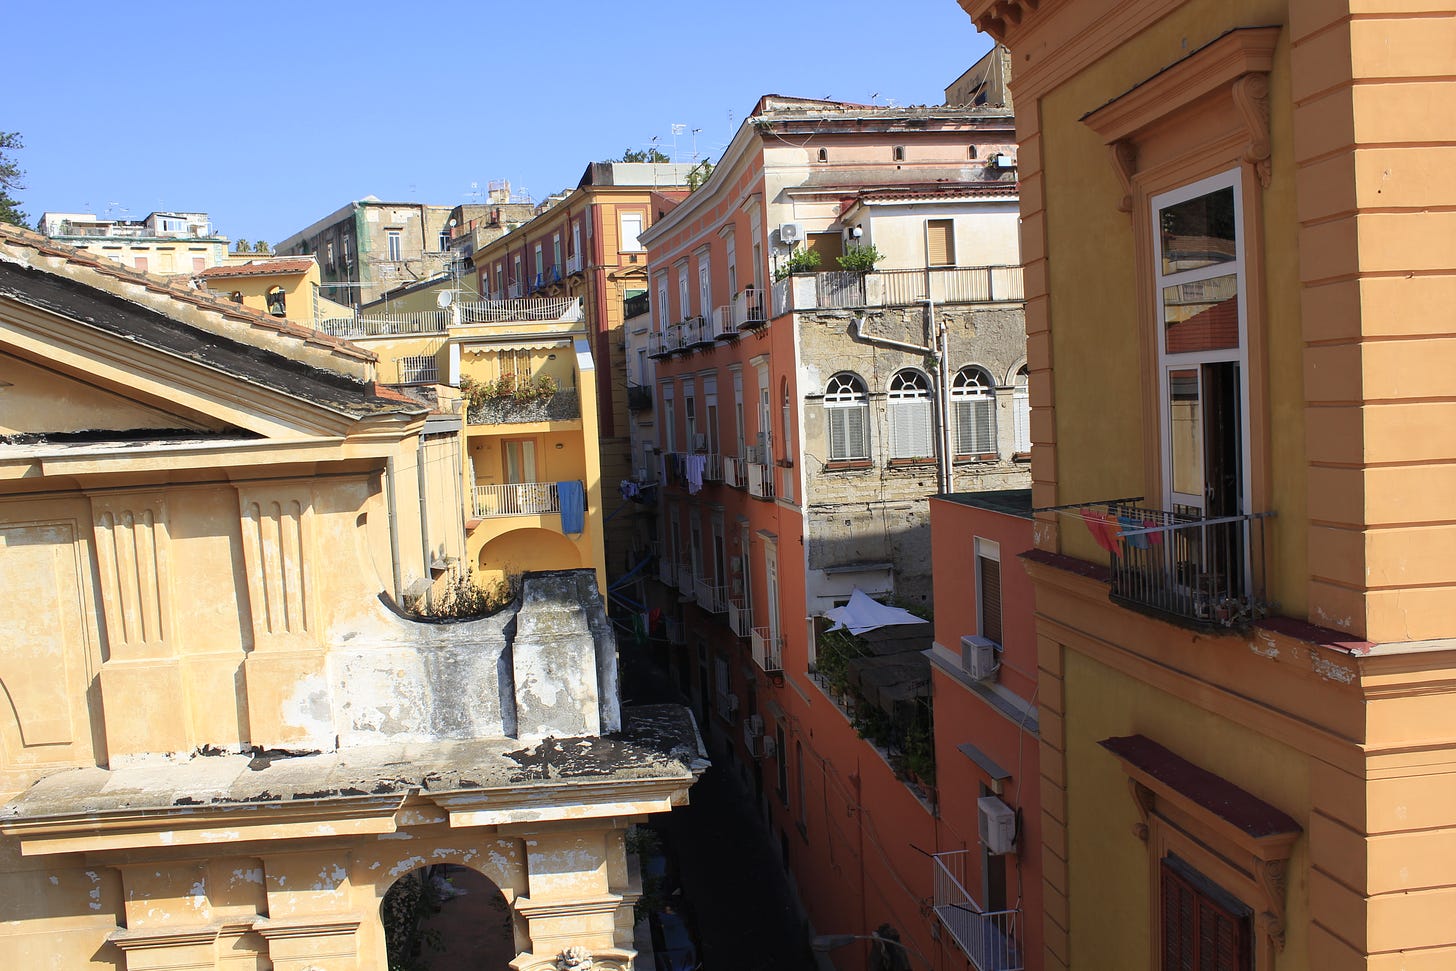 a view of colorful buildings in a Naples neighborhood